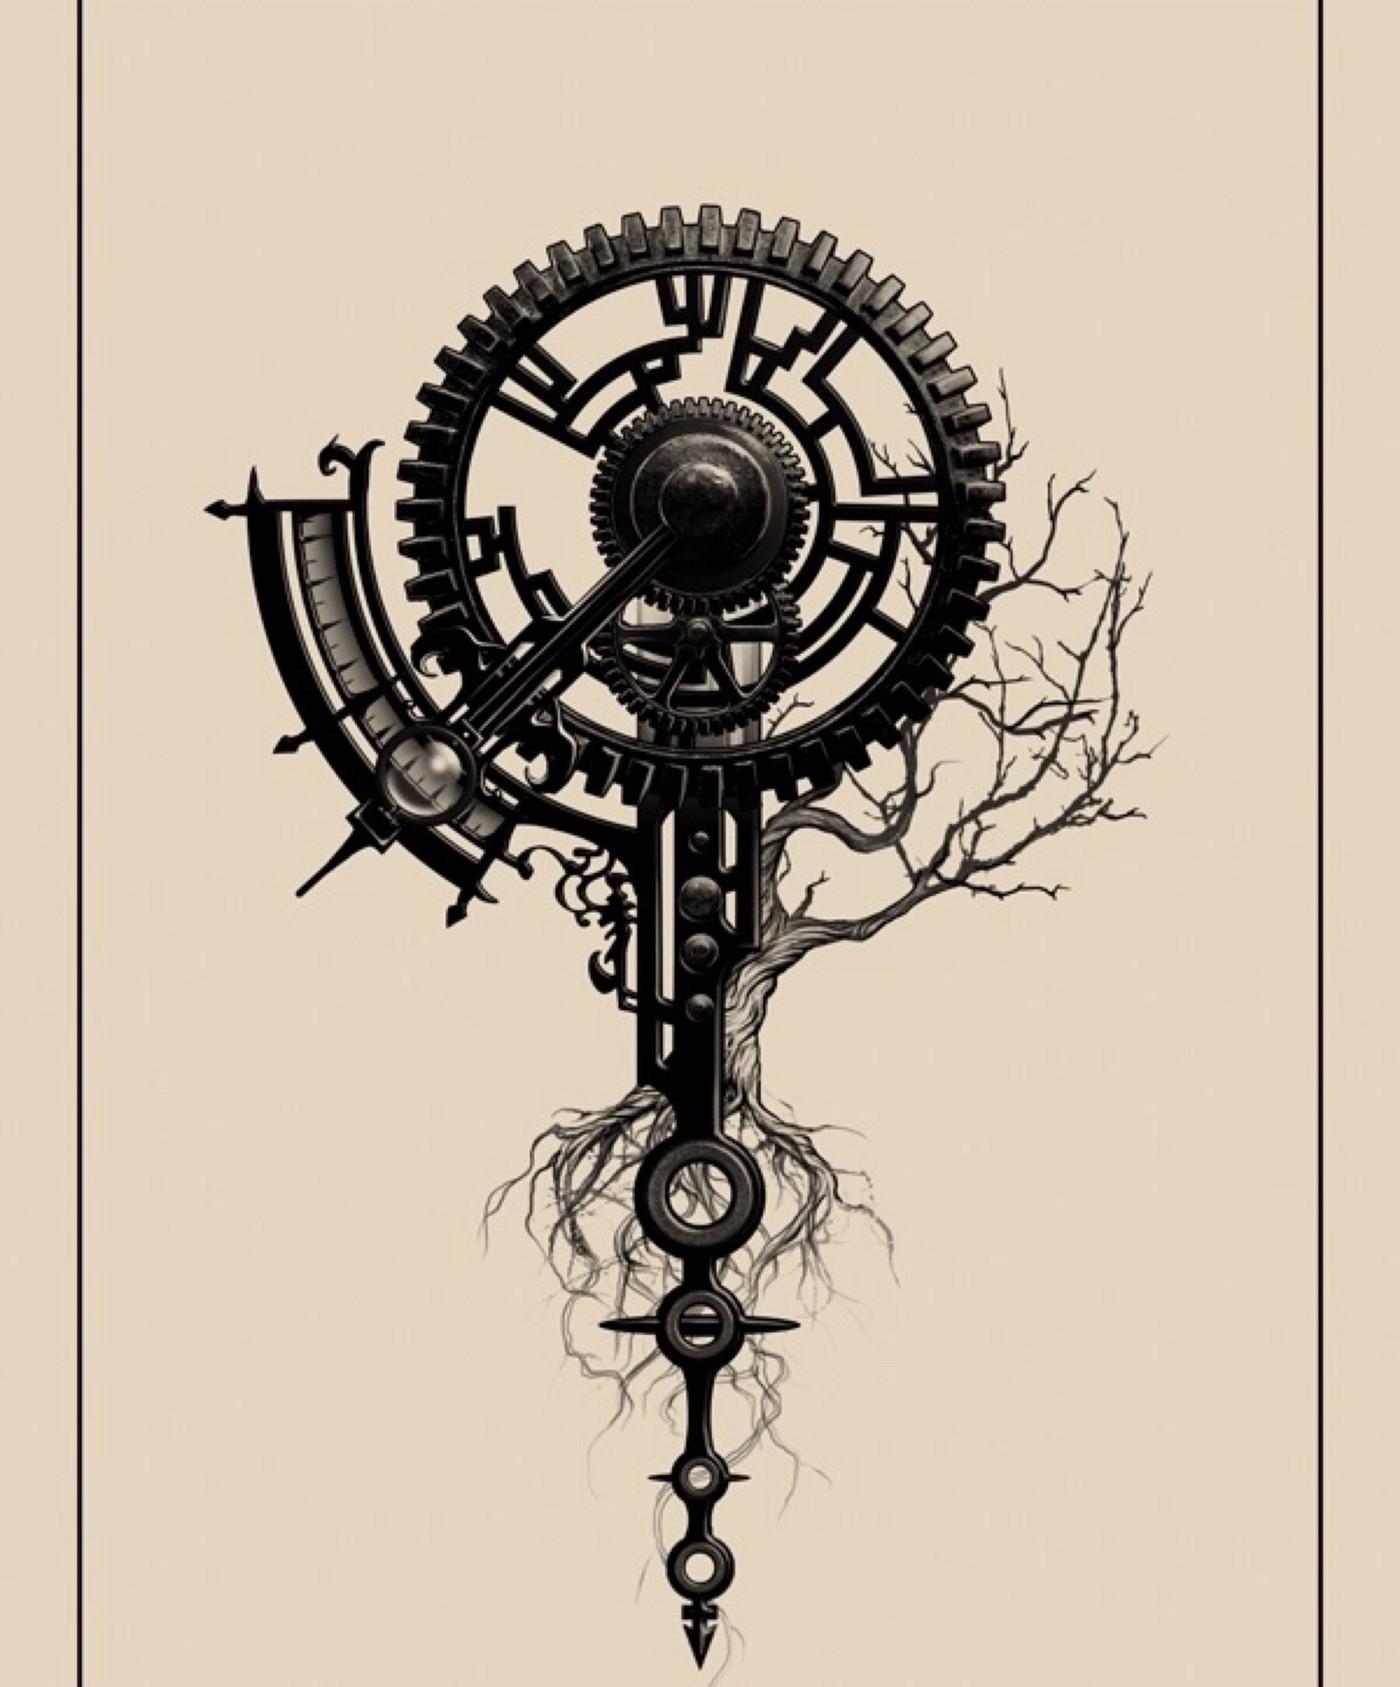 Image of a clock like gear with branches coming out; a found parti image of the play.